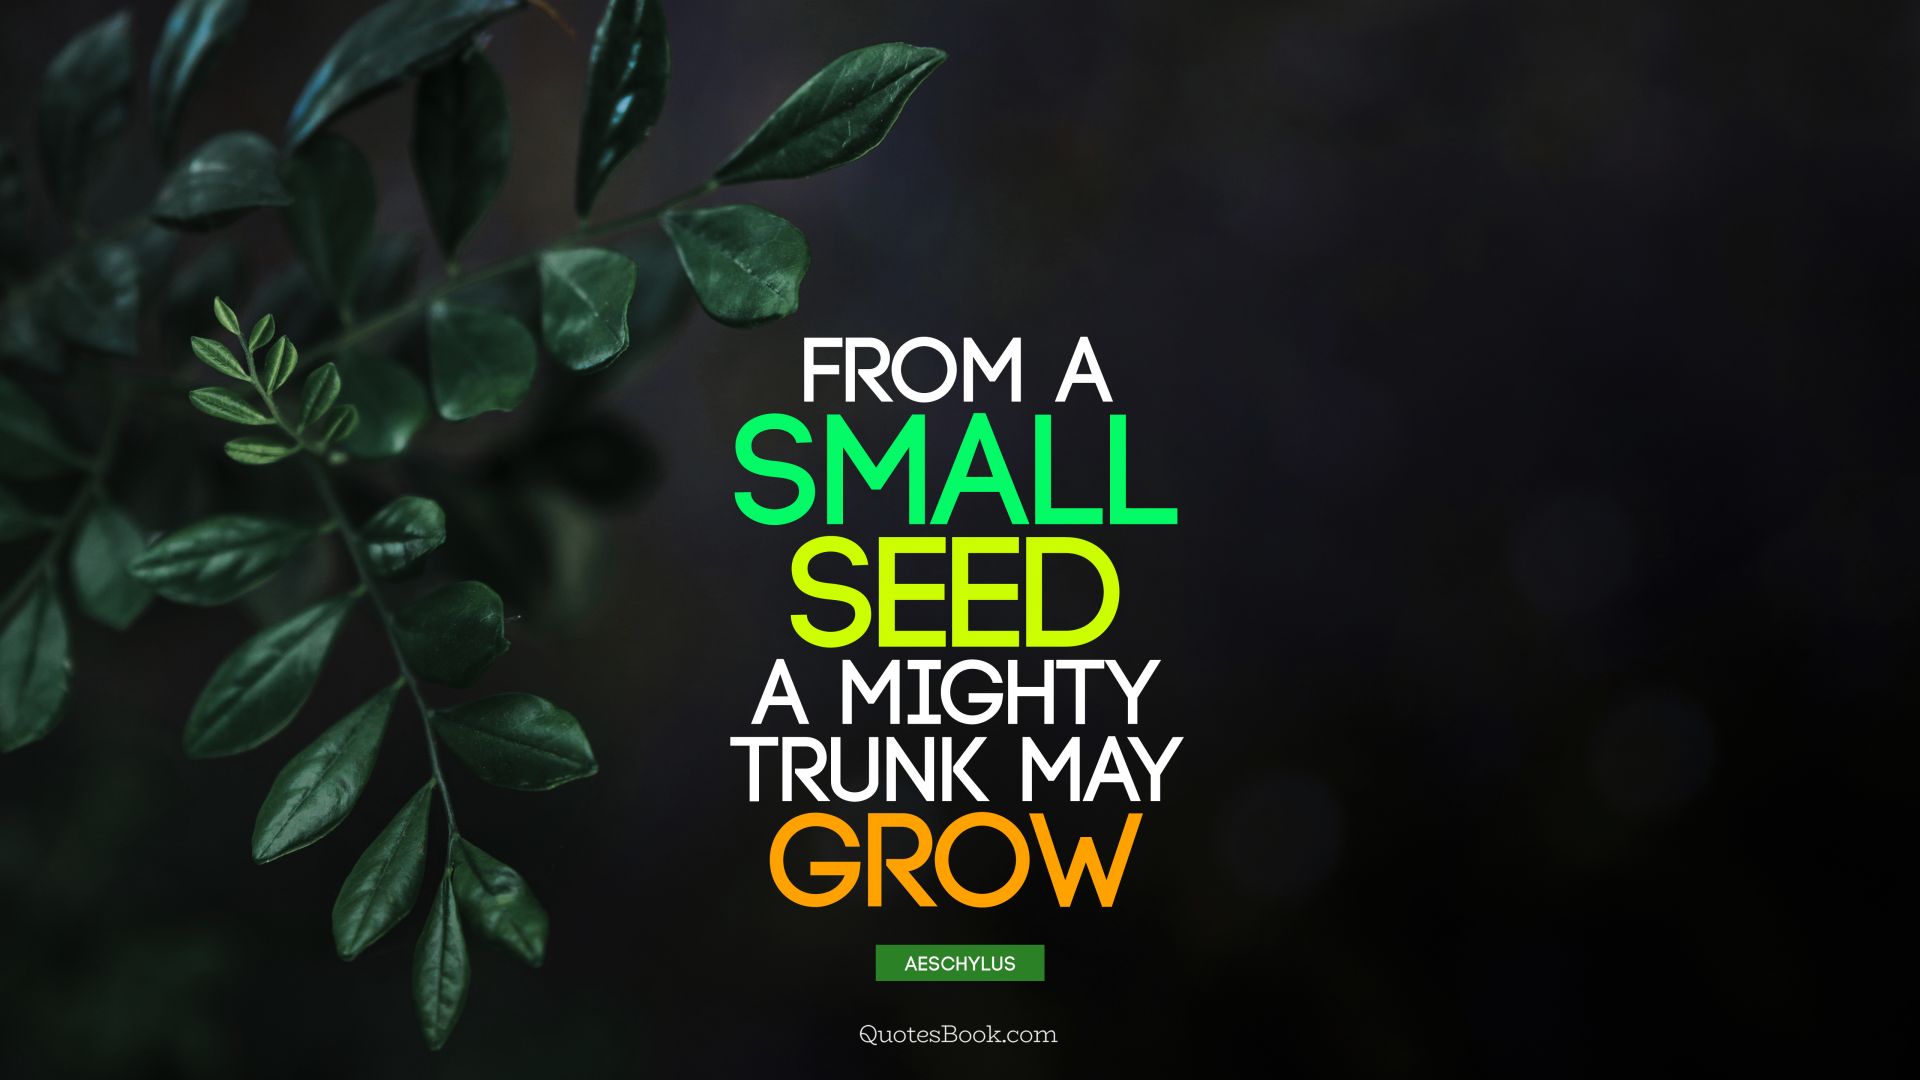 From a small seed a mighty trunk may grow. - Quote by Aeschylus